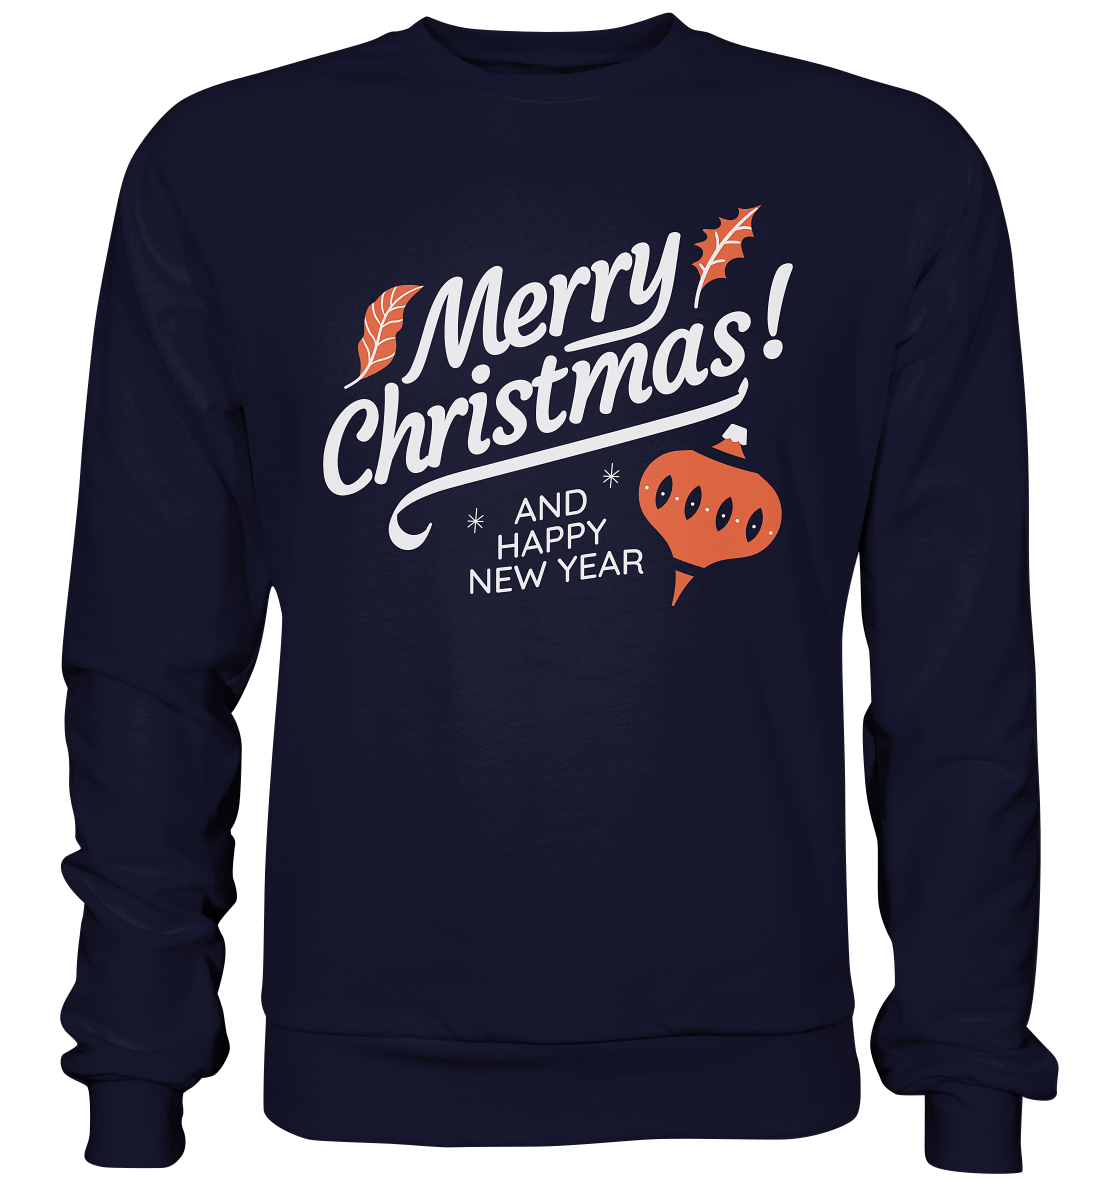 Merry Christmas and Happy New Year, Merry Christmas and Happy New Year - Basic Sweatshirt